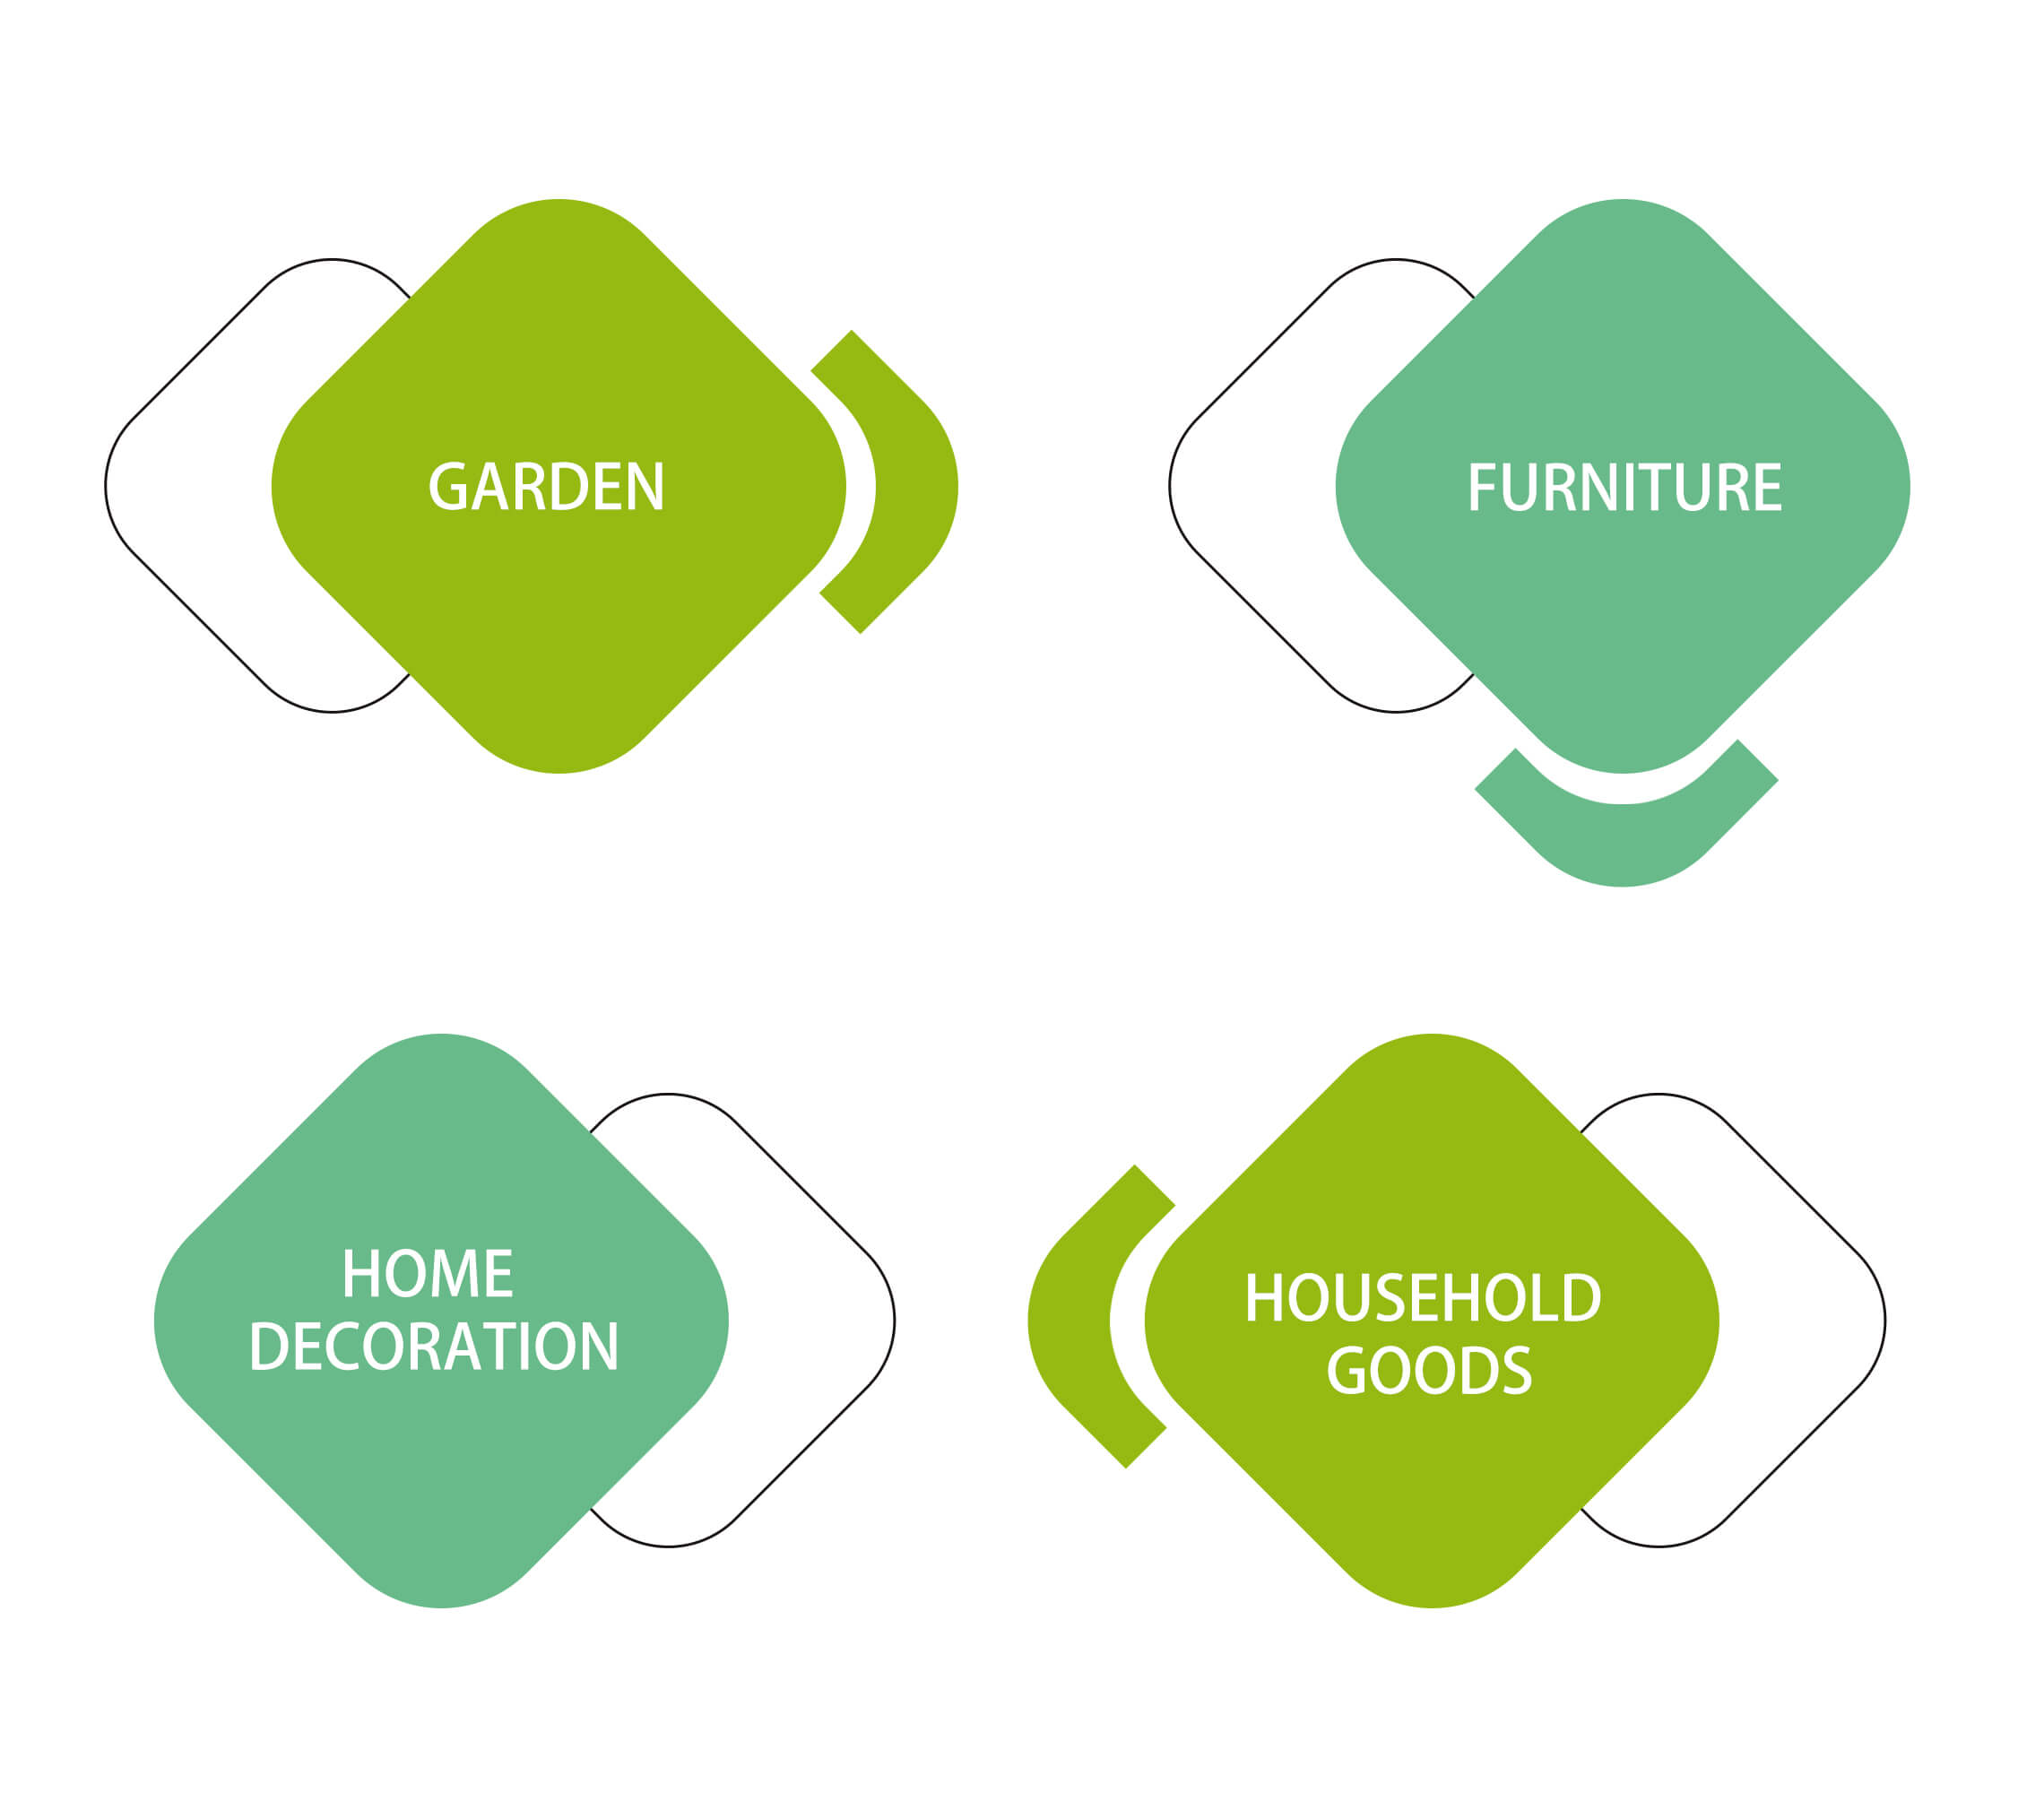 Garden Industry | See the development trend of the garden tool industry from the world’s three major consumer markets